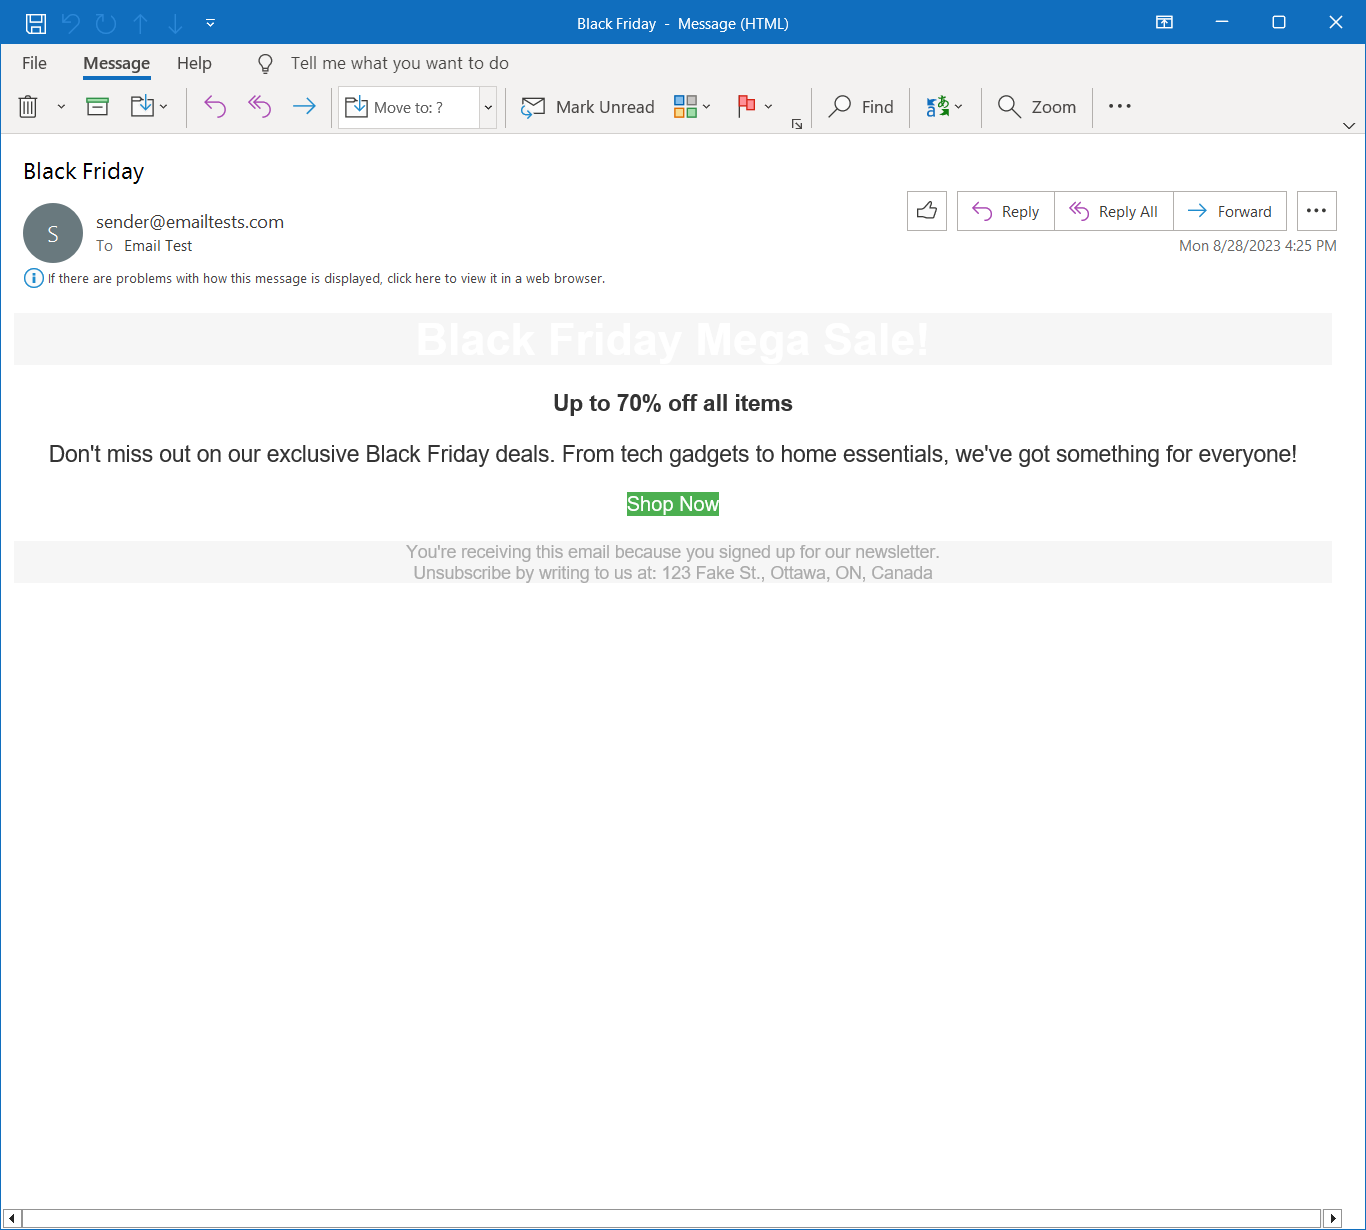 The original email rendered in Outlook